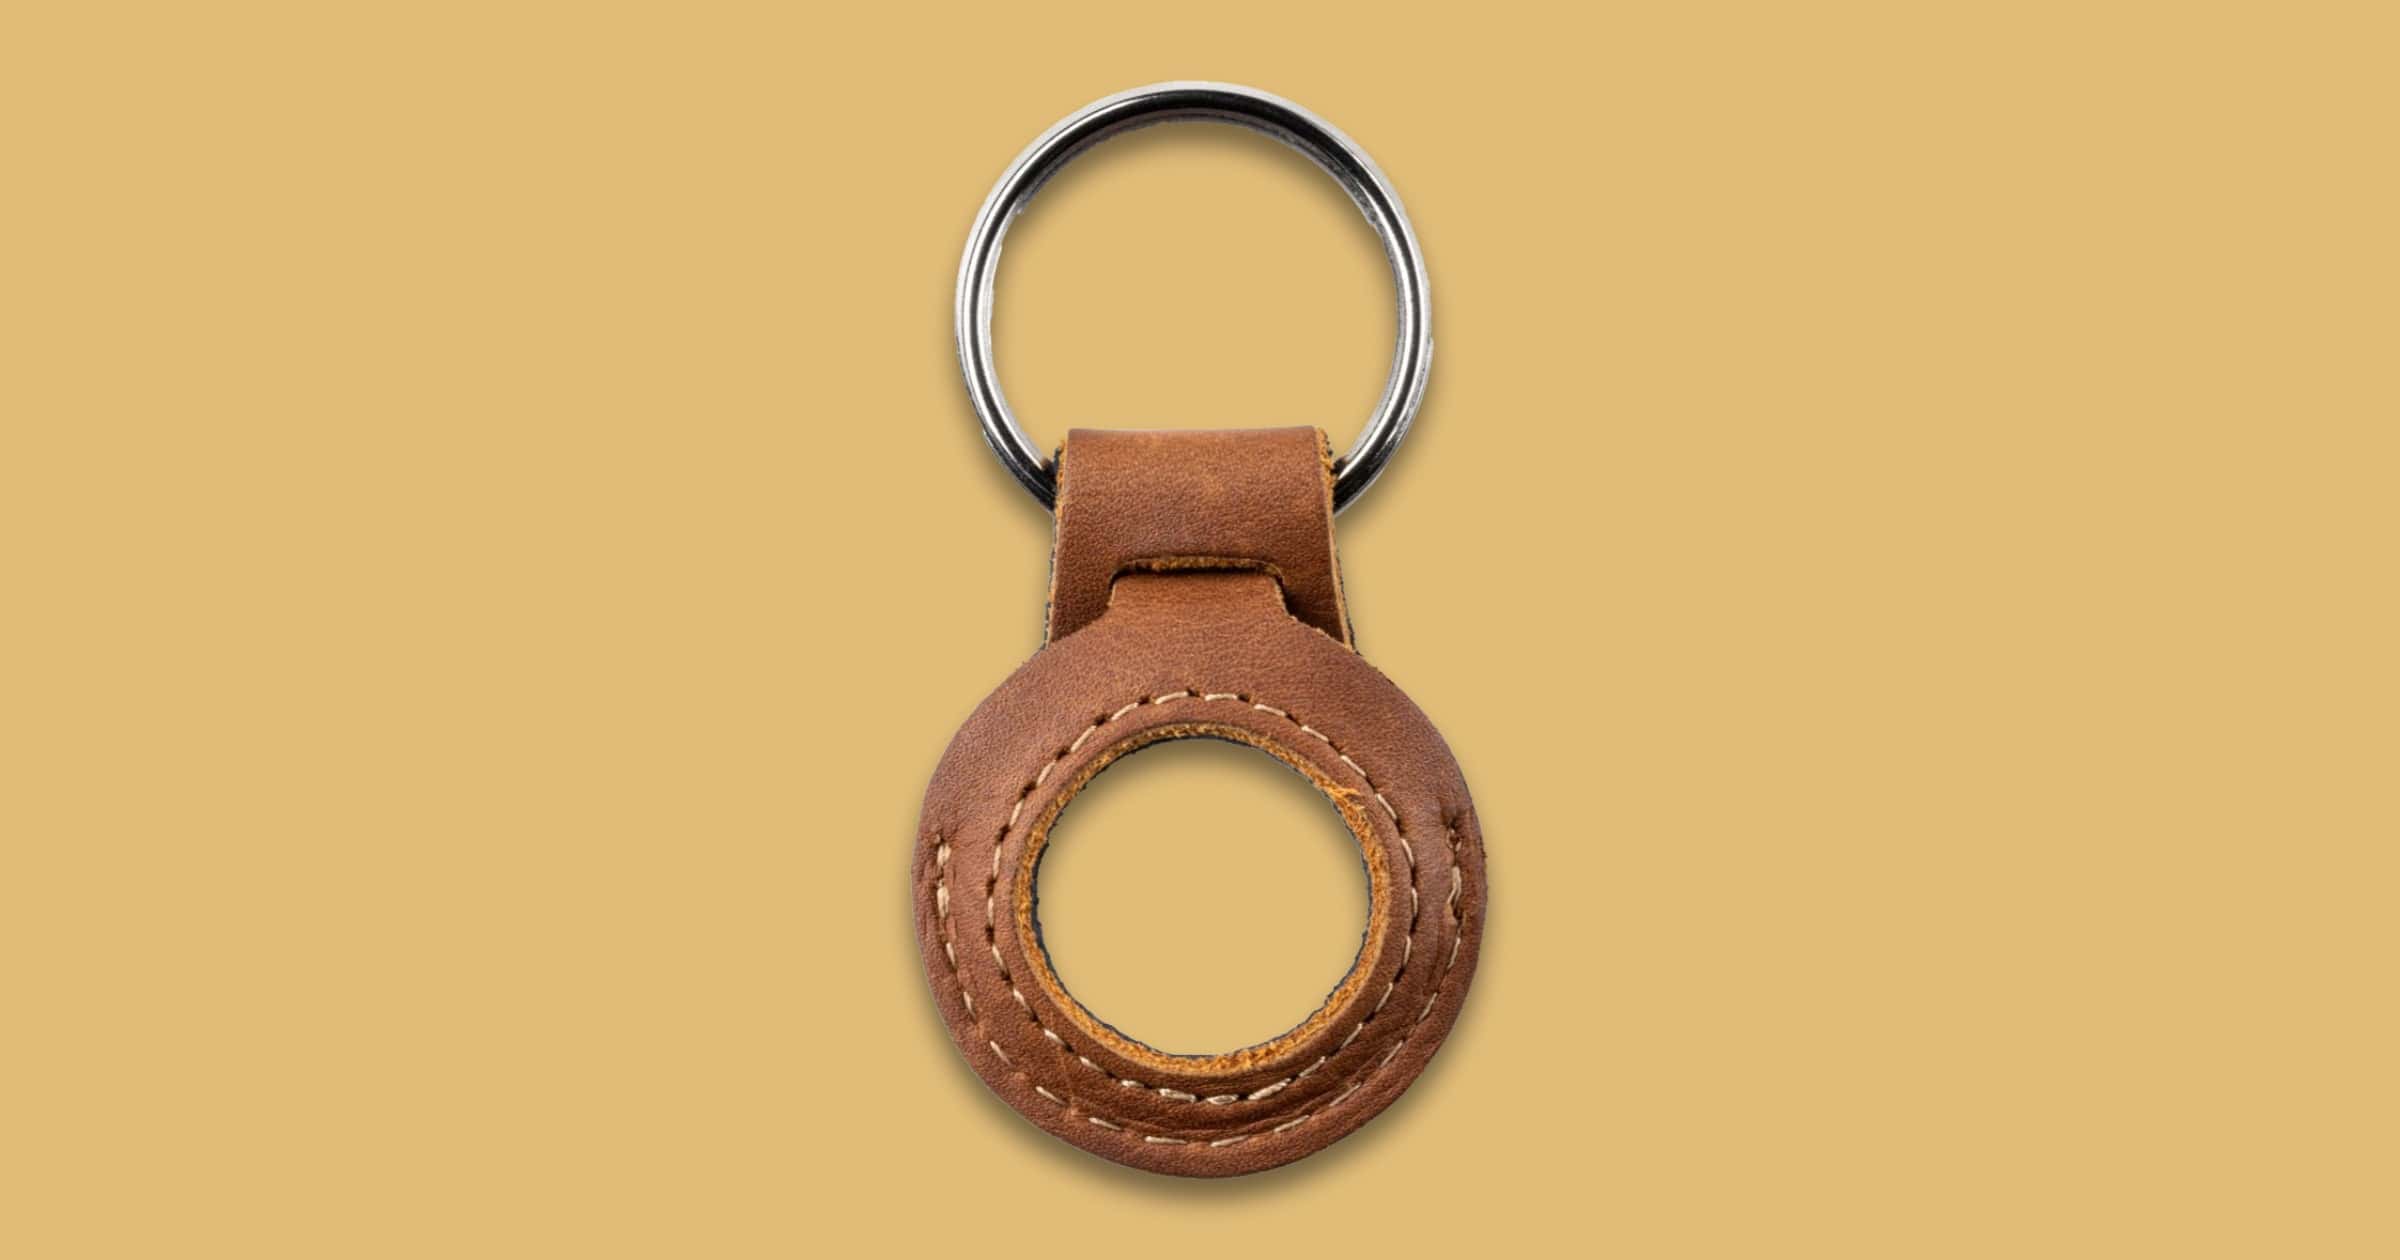 Pad & Quill Releases Leather AirTag Keychain Called ‘The Jimmy’